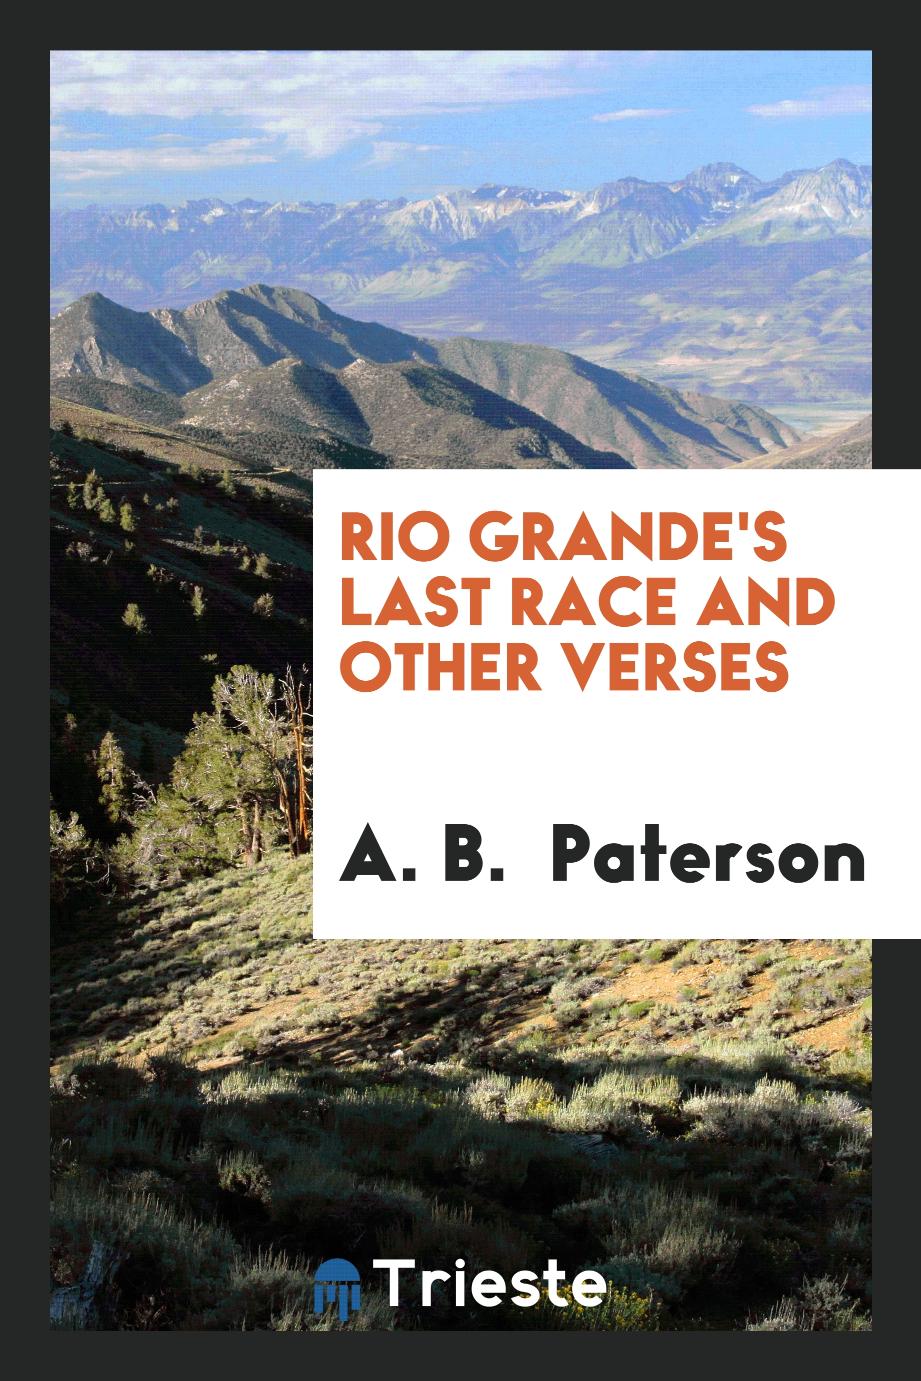 Rio Grande's last race and other verses